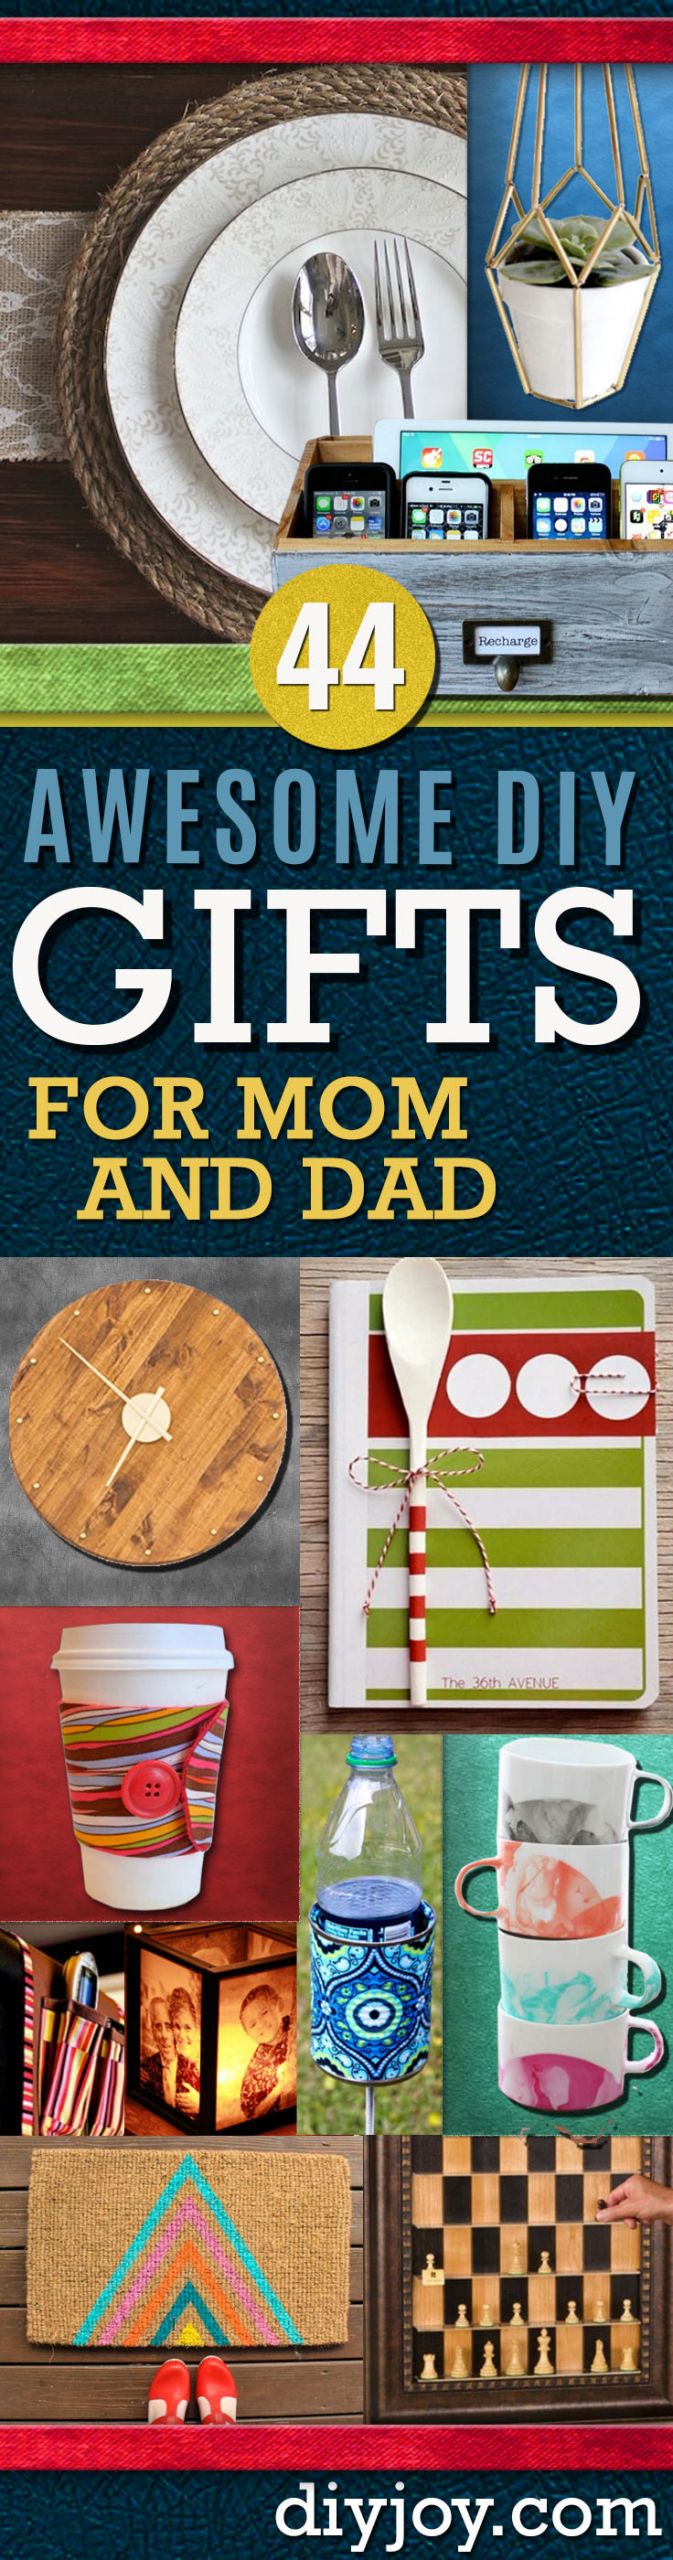 Christmas Gift Ideas For Dads
 Awesome DIY Gift Ideas Mom and Dad Will Love